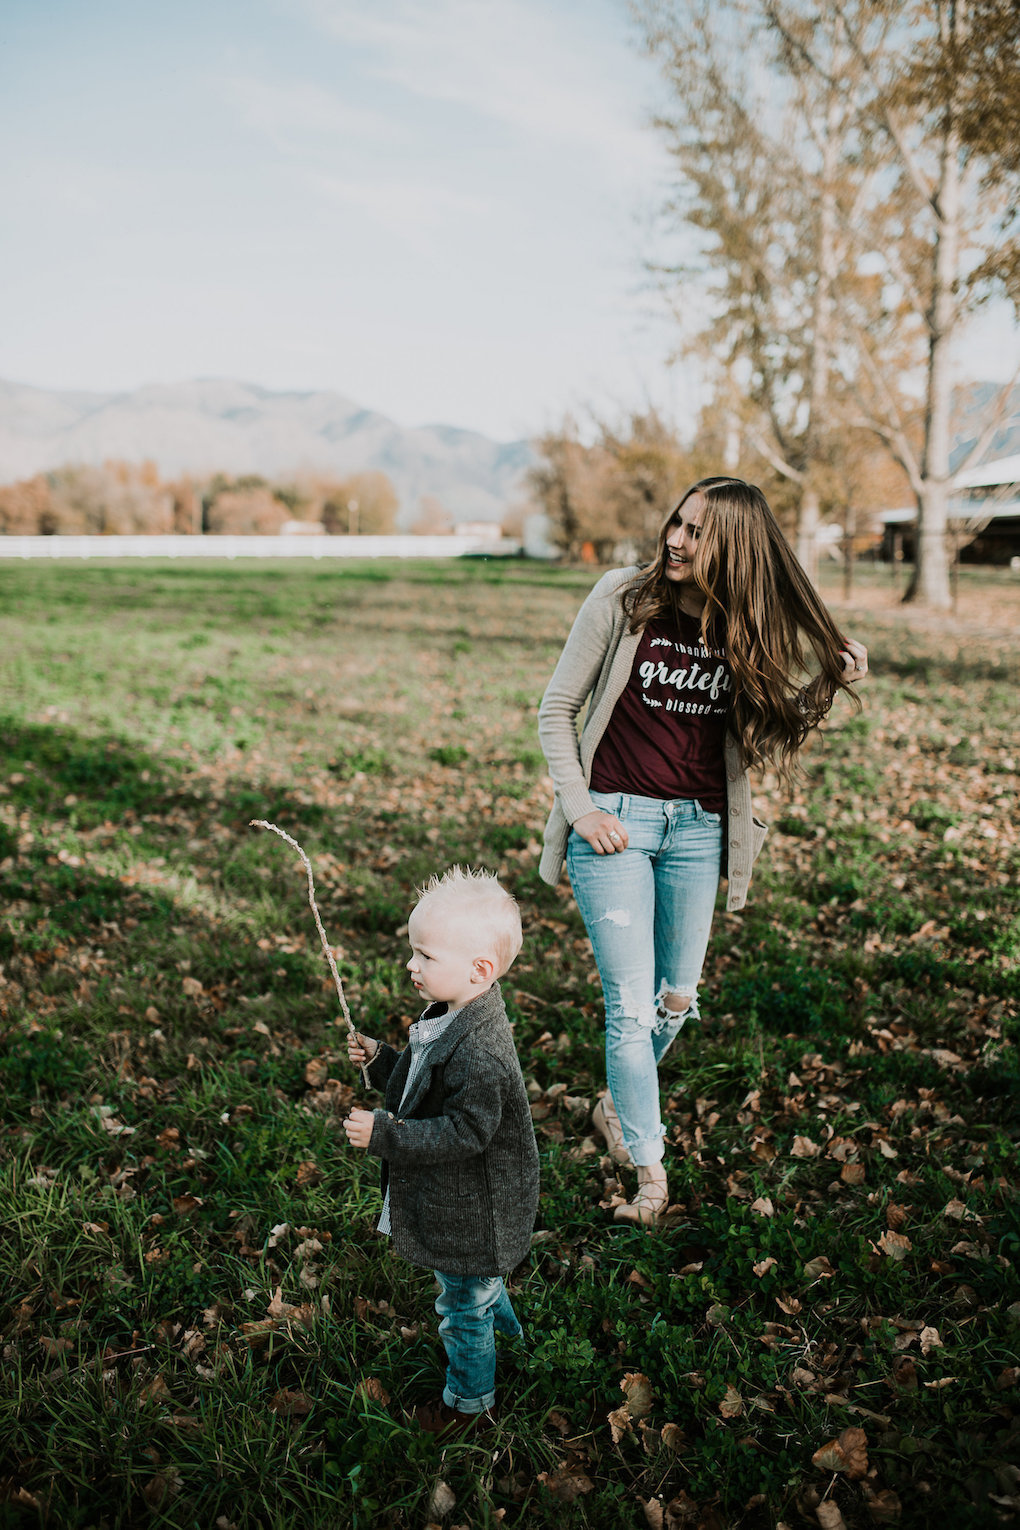 mom and little boy playing in field little boy in tweed jacket and plaid button up shirt with skinny jeans and brown boots mom in long cream cardigan a wine colored grateful tee and distressed denim